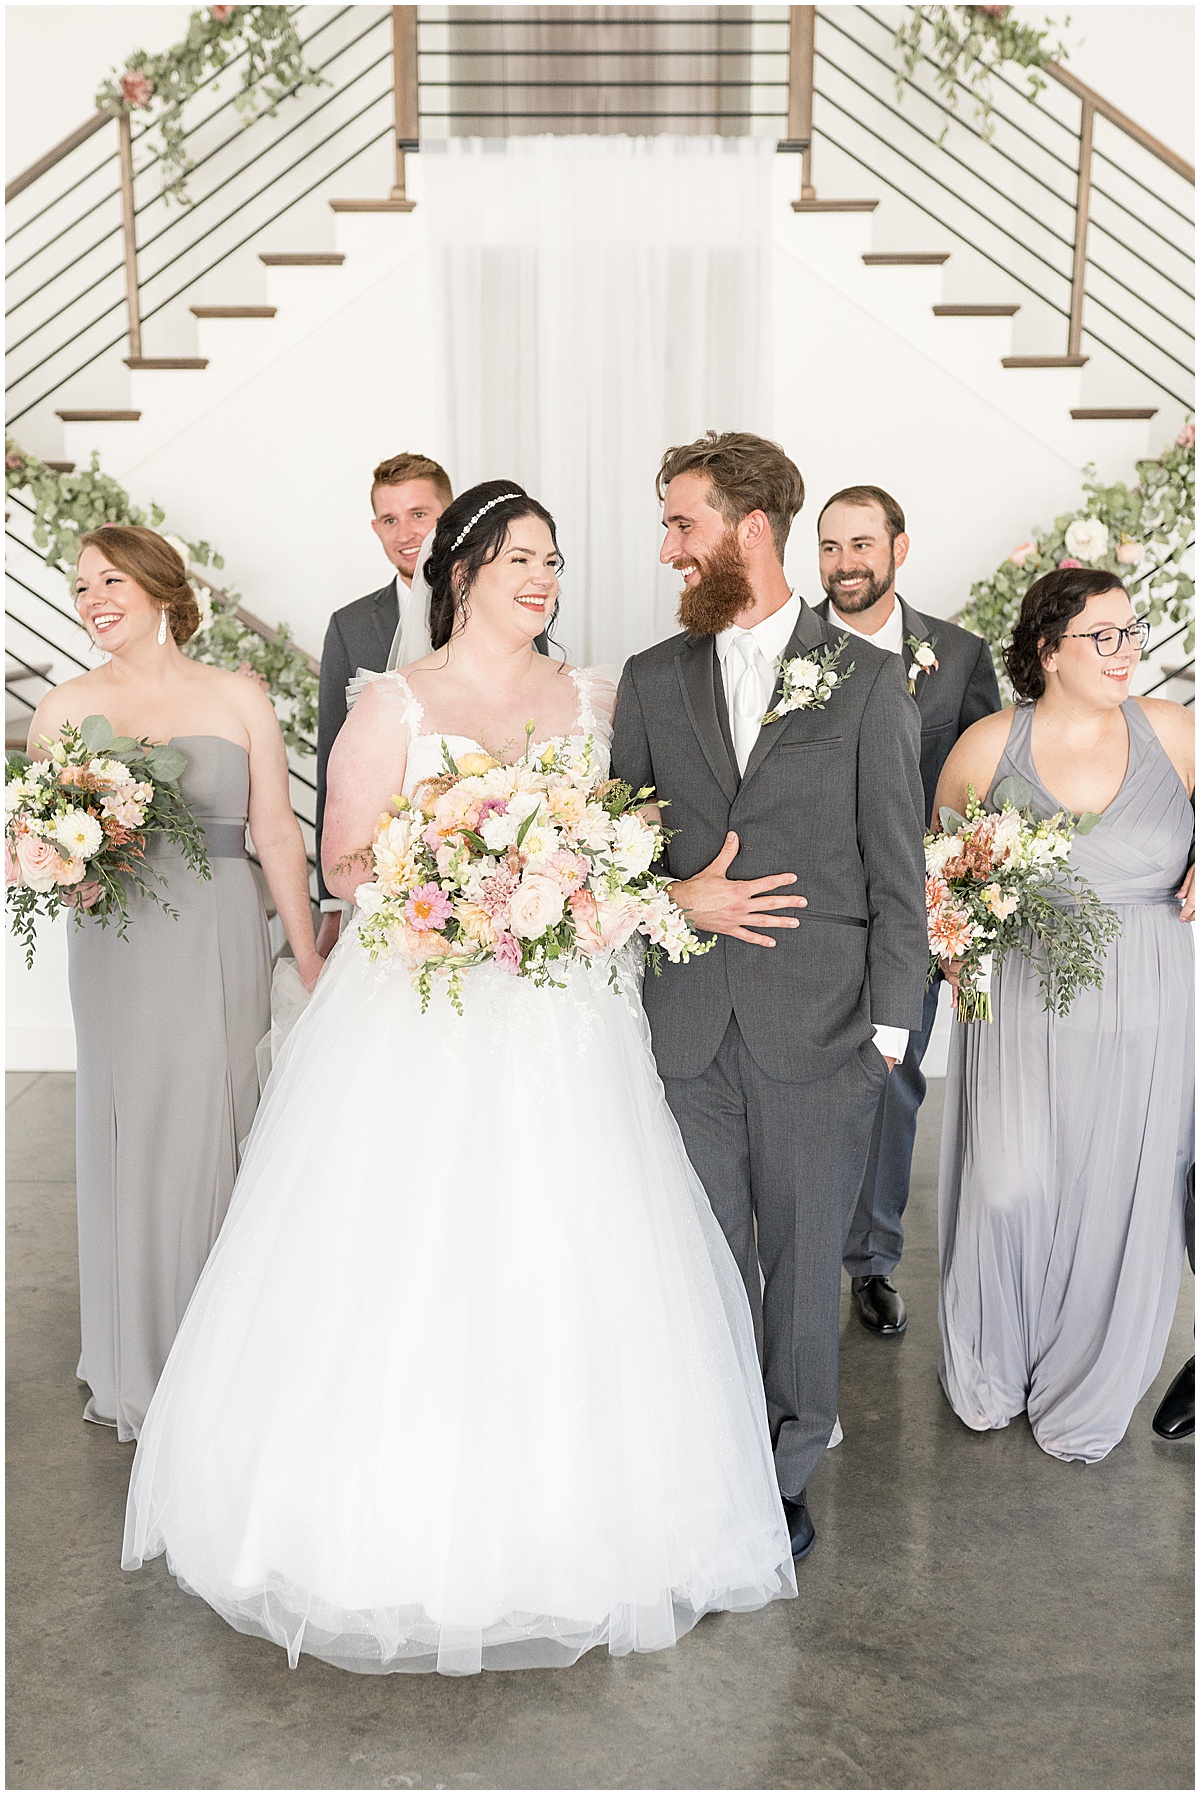 Bride and groom walk with bridal party before pastel wedding at New Journey Farms in Lafayette, Indiana